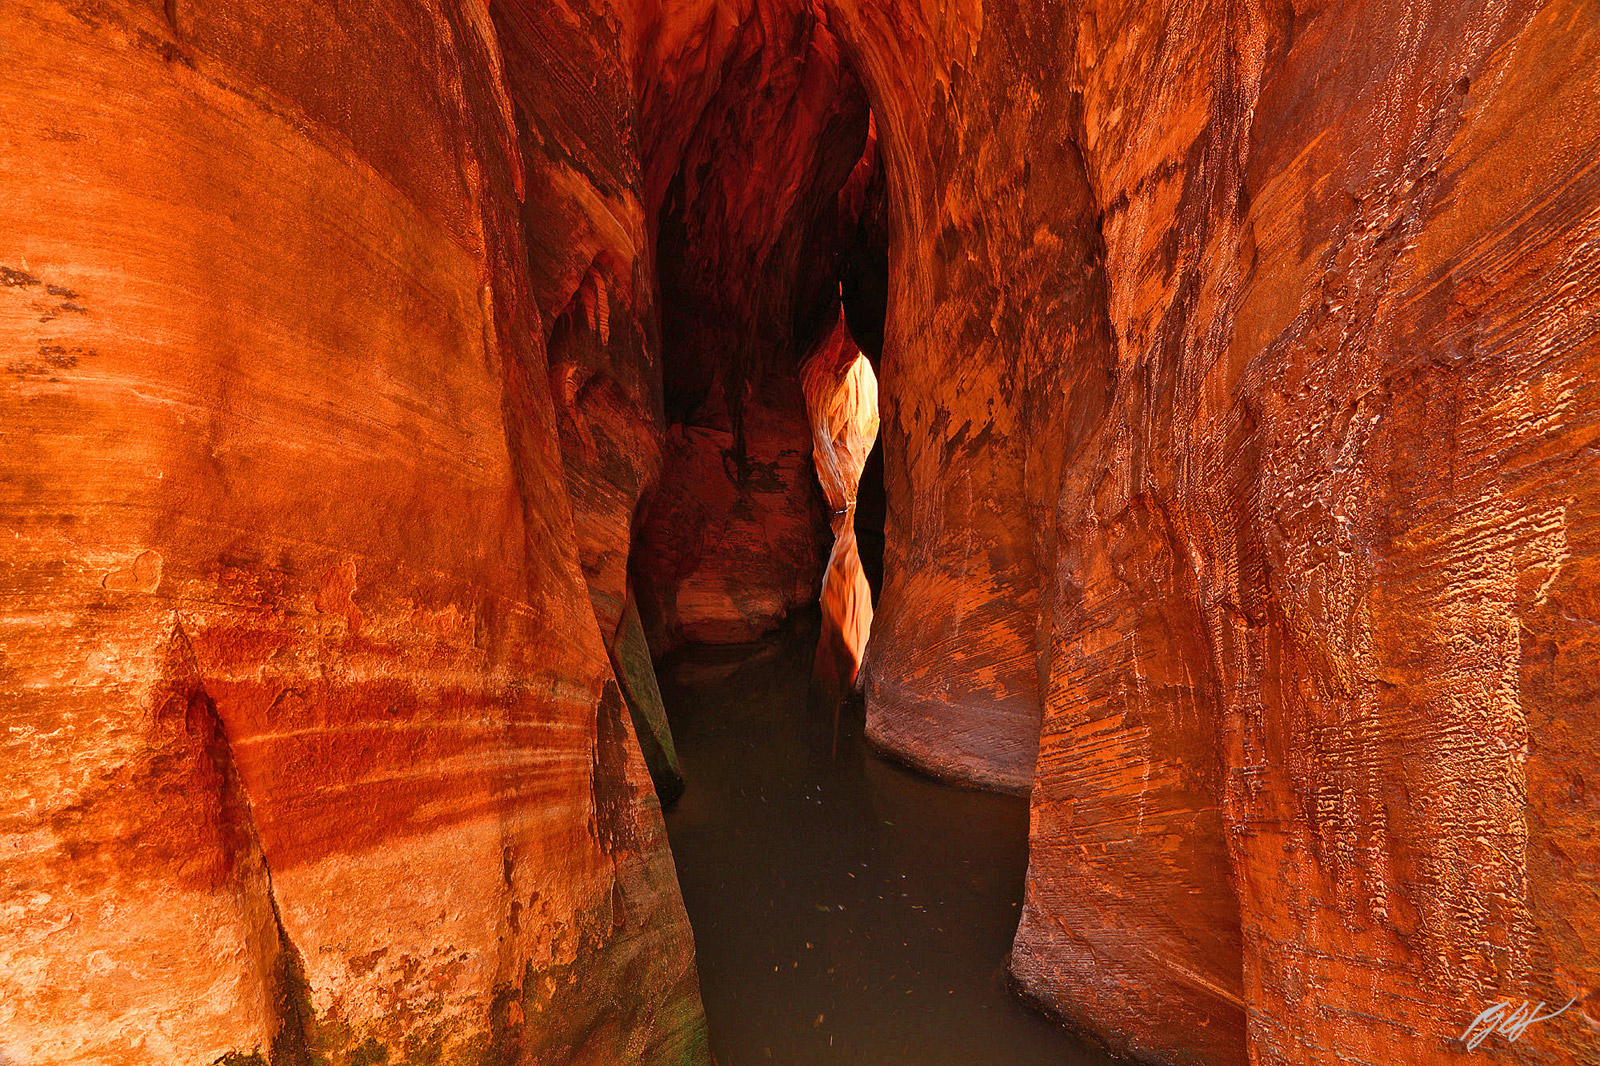 Water in Tunnel Slot Canyon in the Grand Staircase-Escalante National Monument in Utah